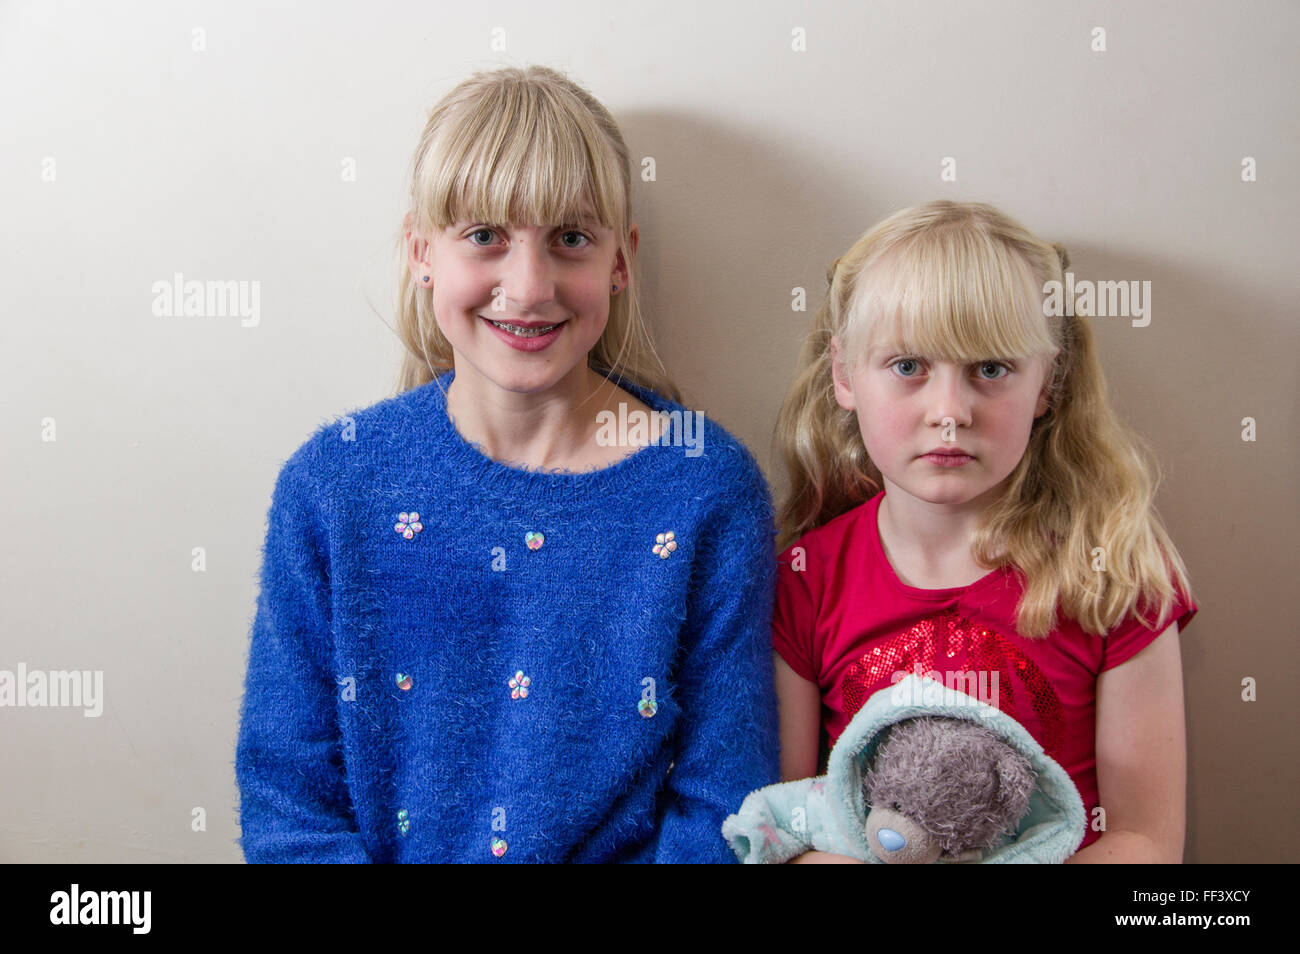 Studio portrait of two young, blond girls against a white background. Stock Photo